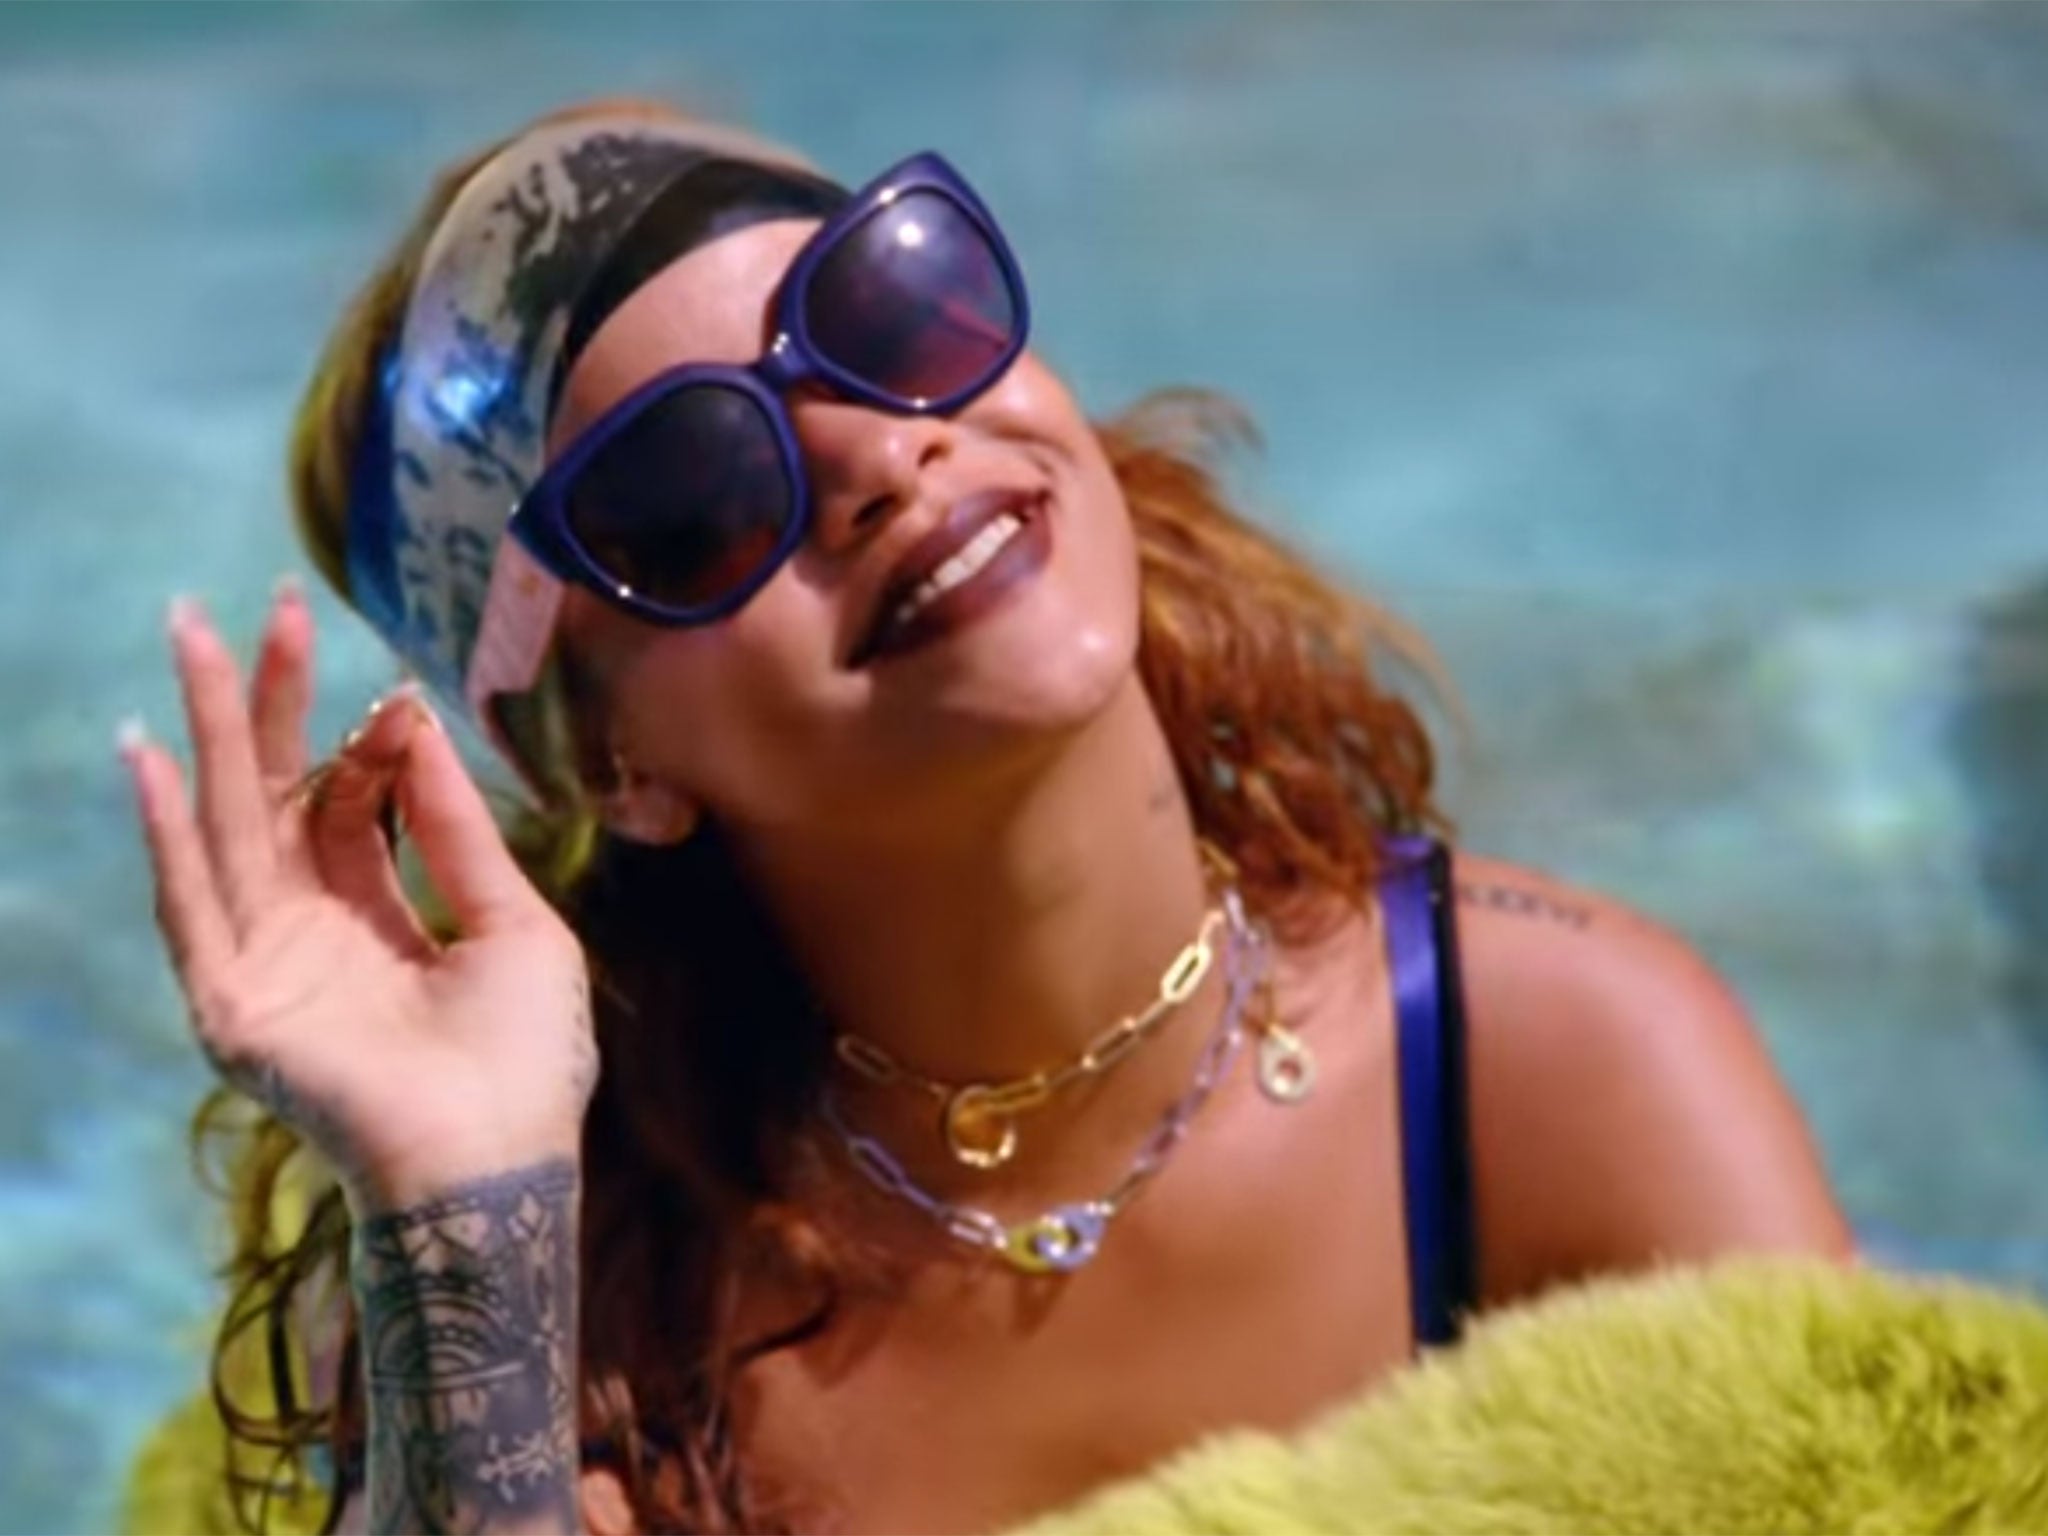 Rihanna is back with yet another highly NSFW music video